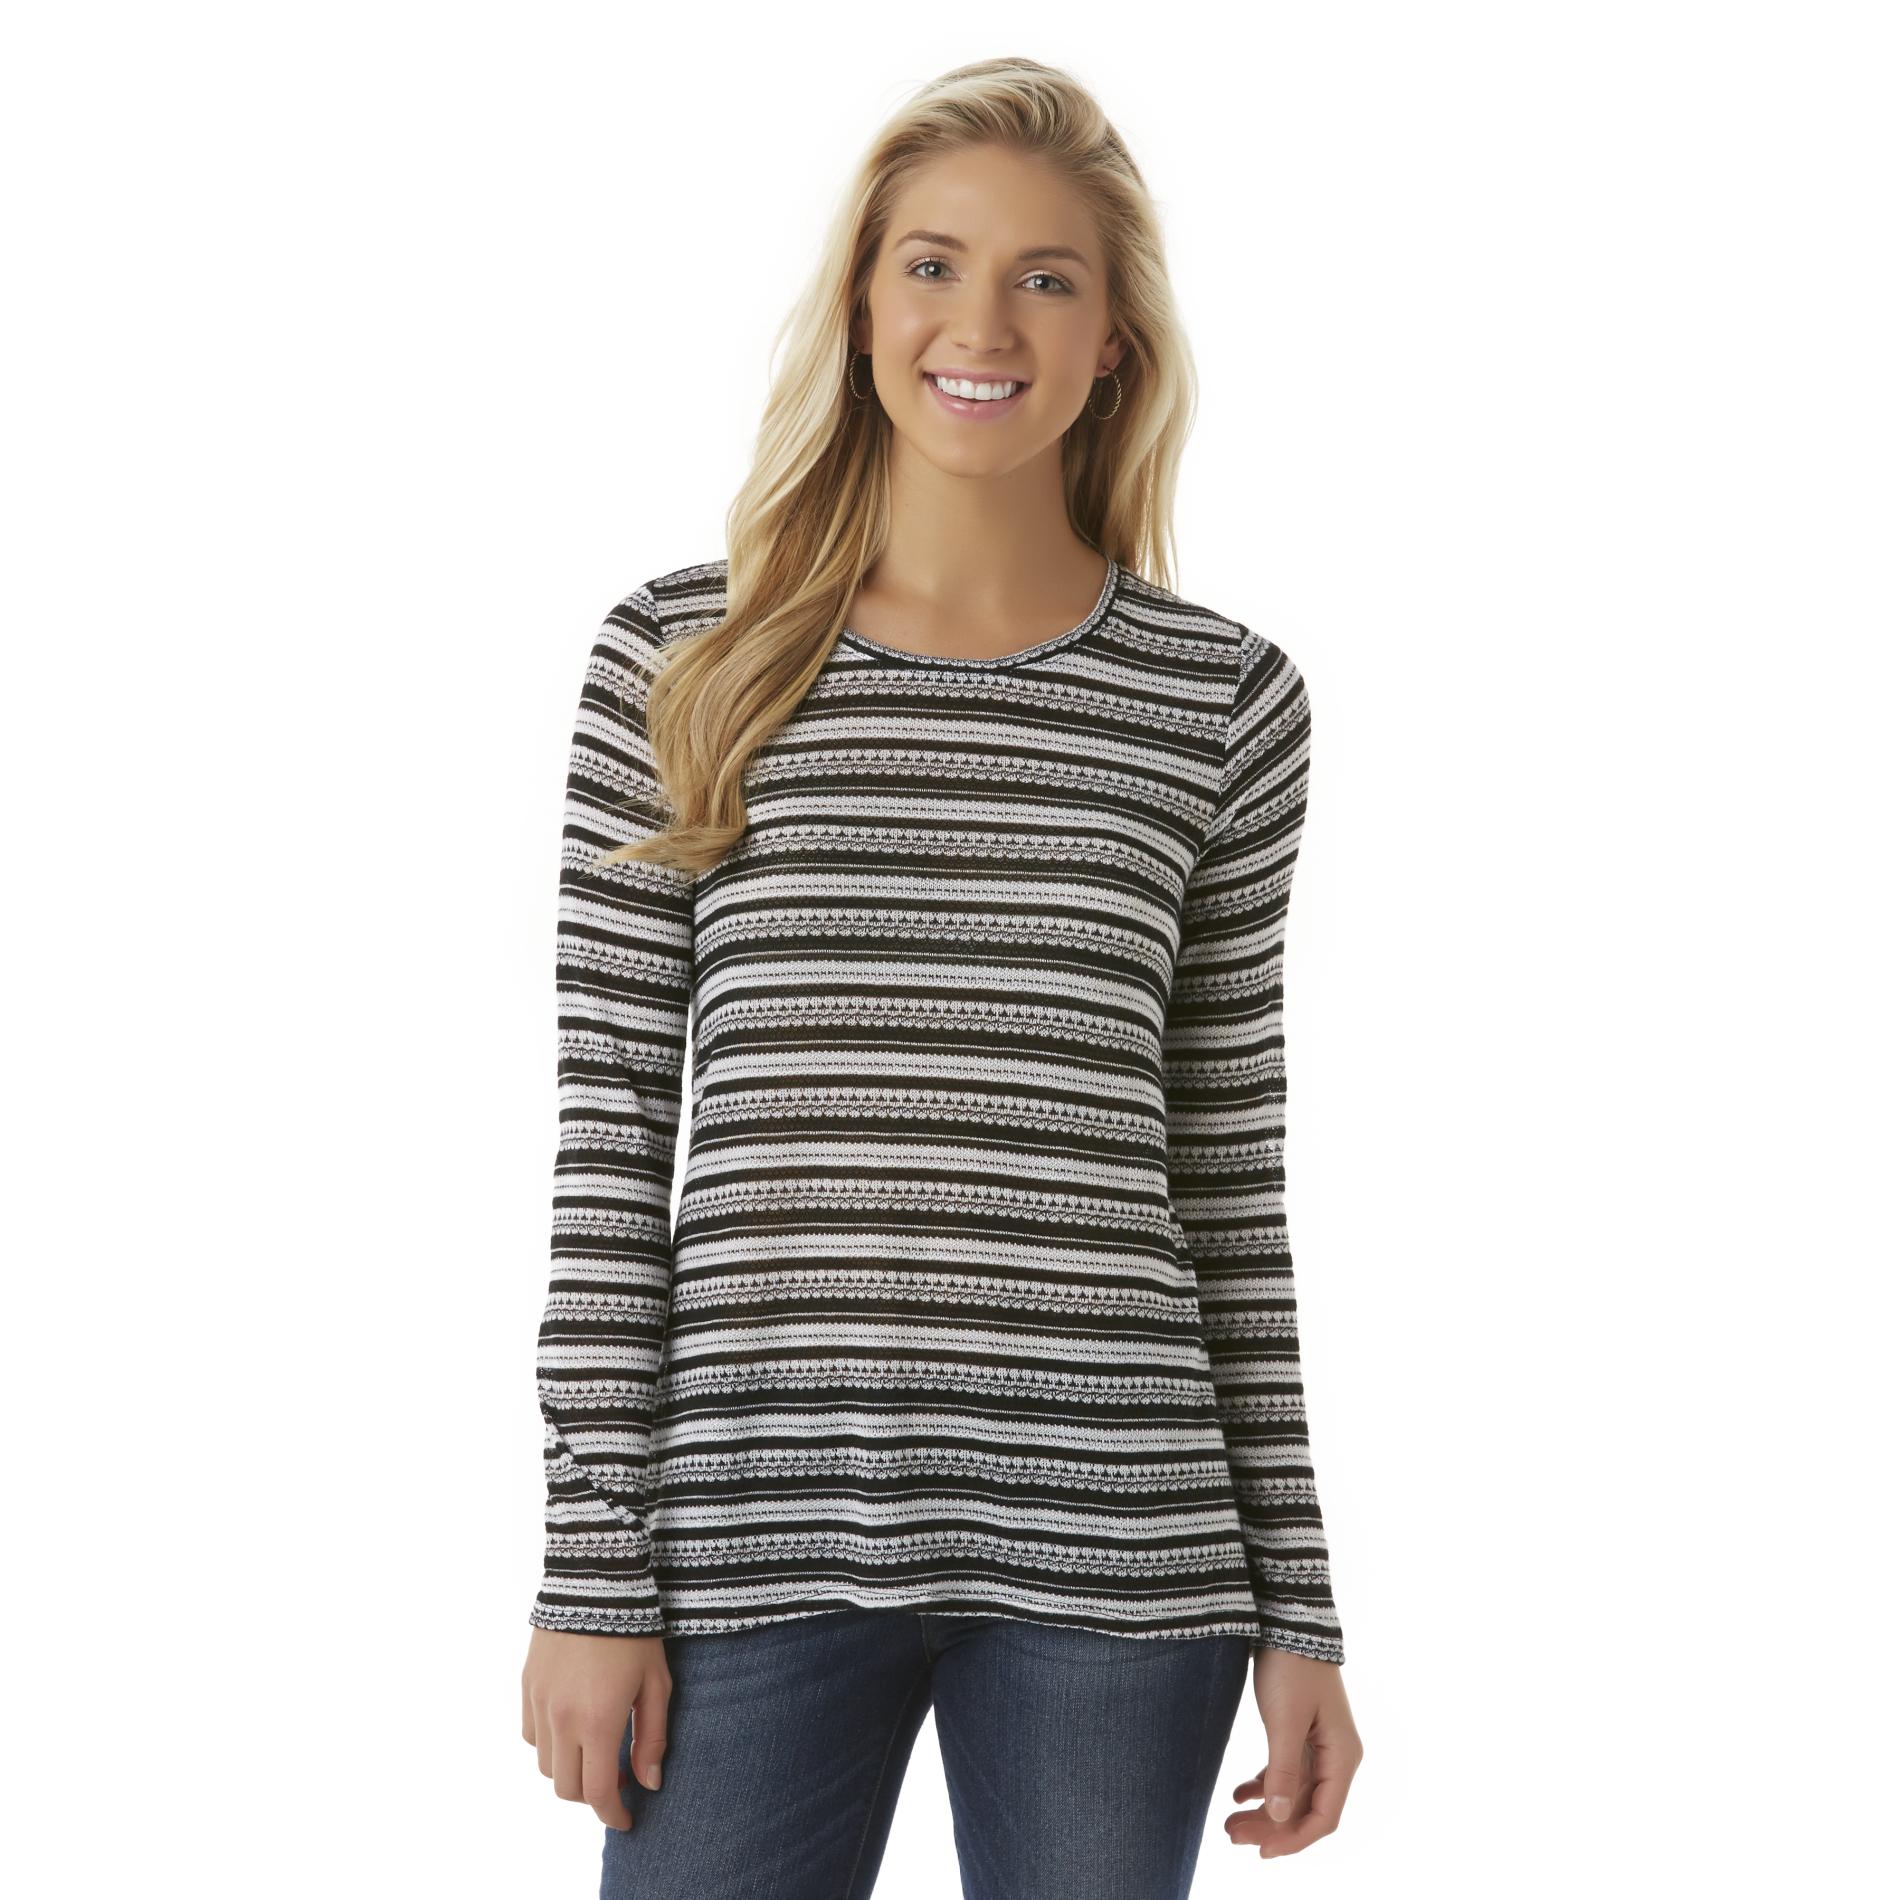 Simply Styled Women's Swing Top - Striped